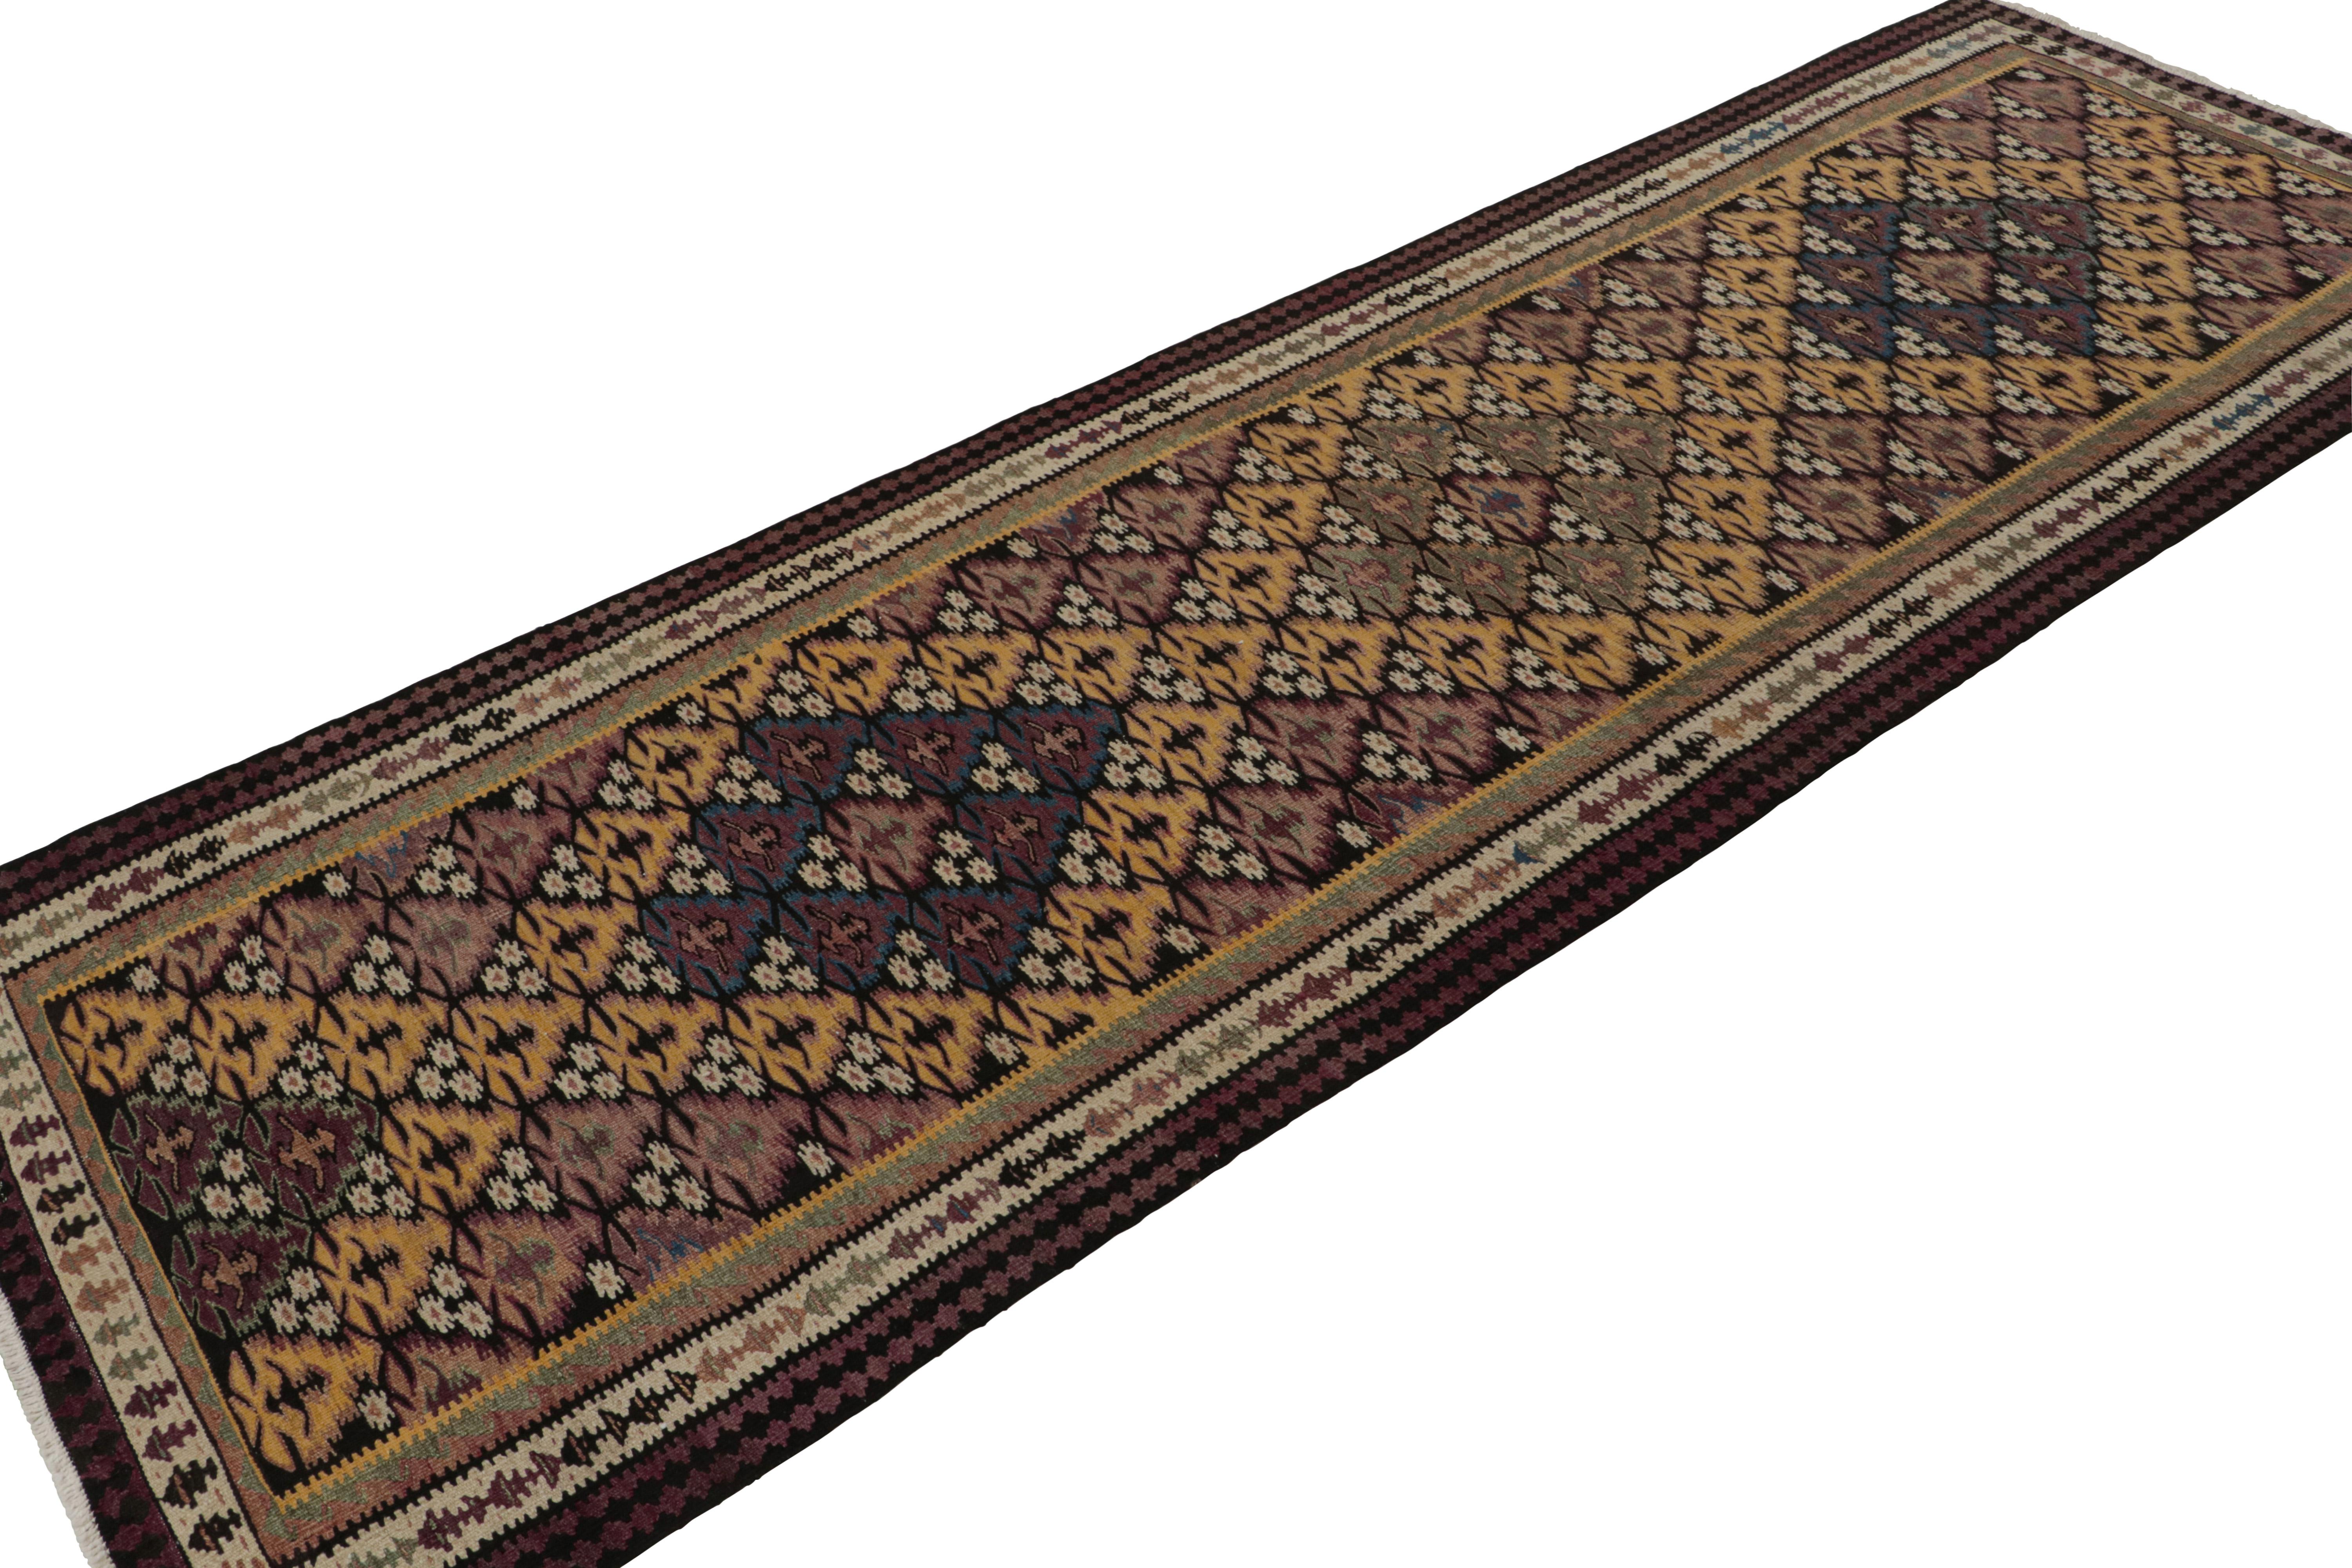 This vintage 3x10 Persian Kilim runner is the latest to join Rug & Kilim’s selection of vintage flatweaves. 

On the Design:

Handwoven in wool circa 1950-1960, the piece is full of intricate details. The play of gold with darker tones lends a very